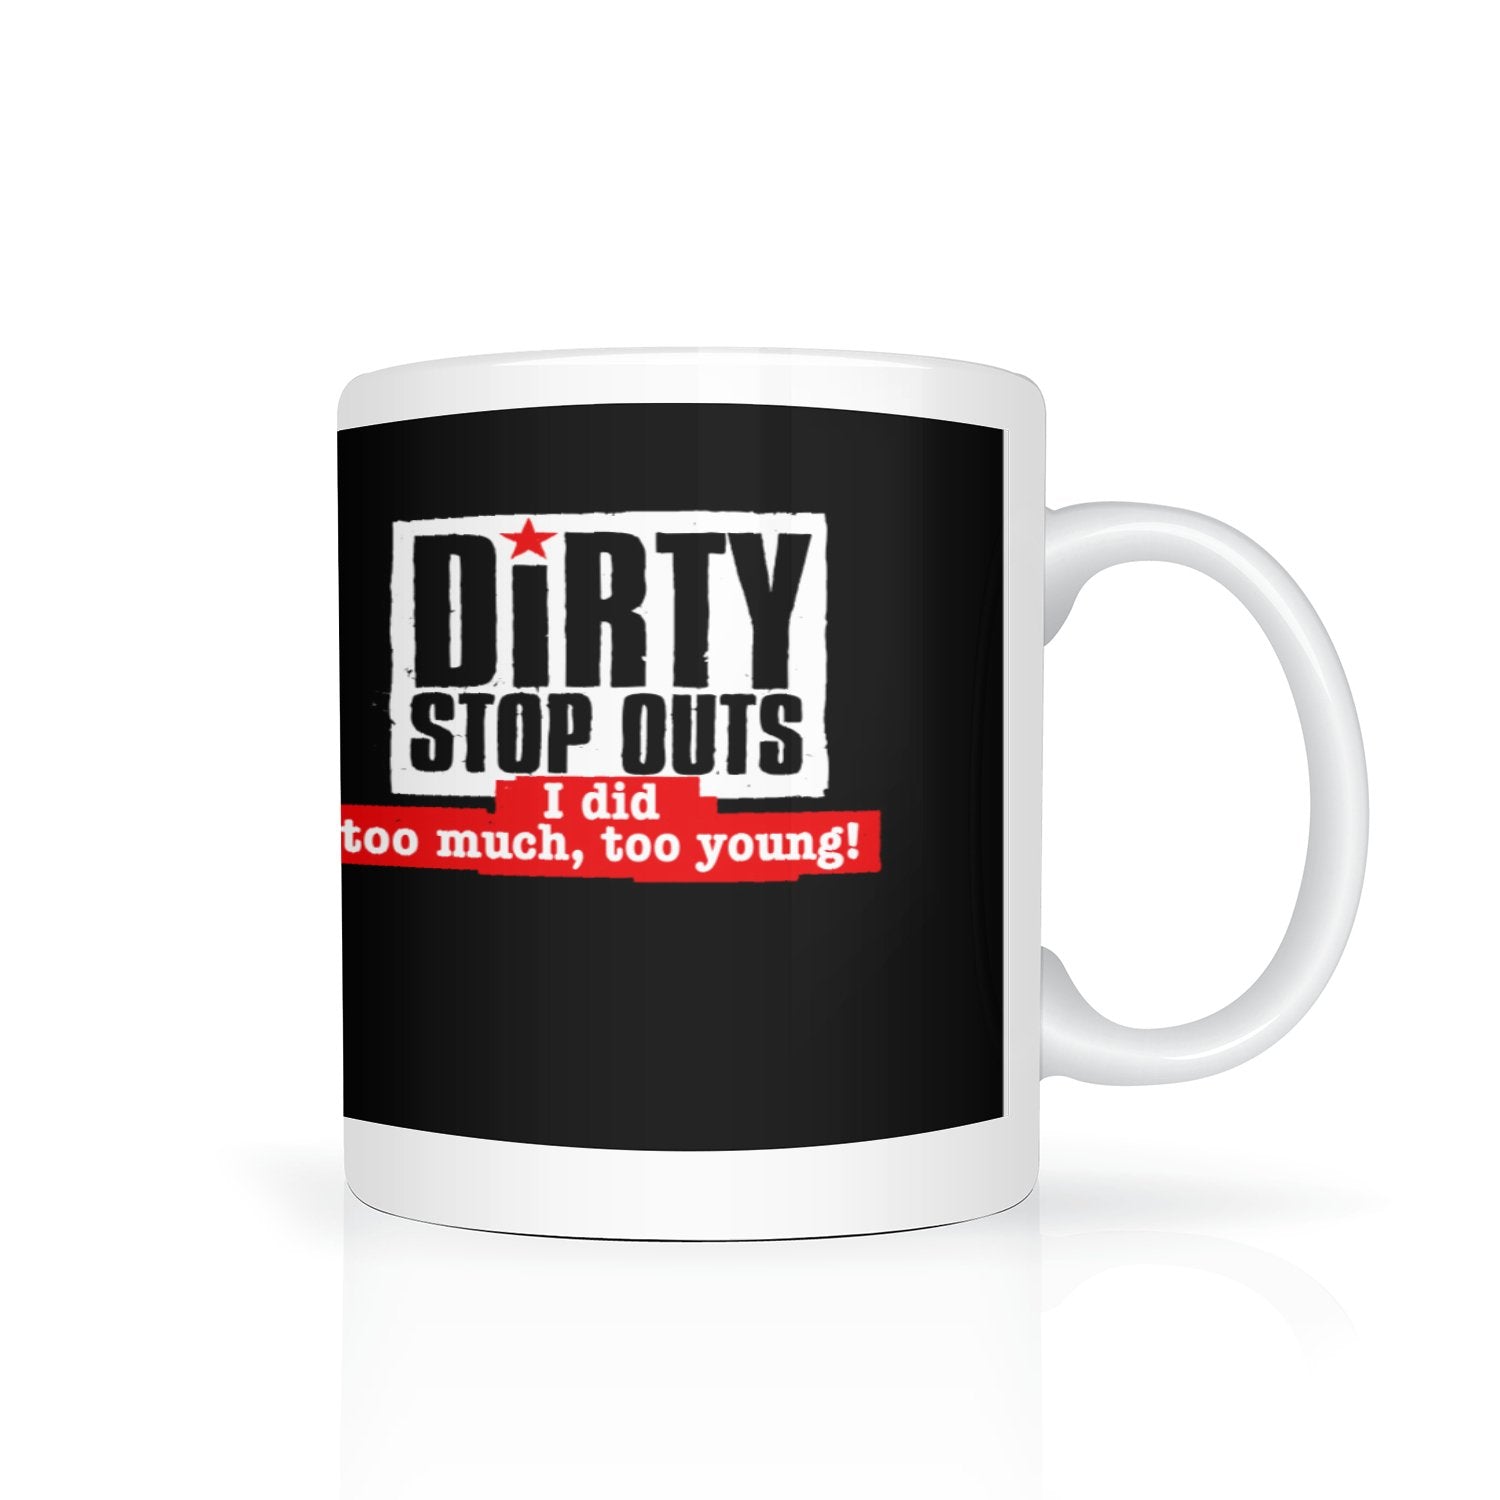 "I did too much, too young" - Dirty Stop Outs - mug - Dirty Stop Outs